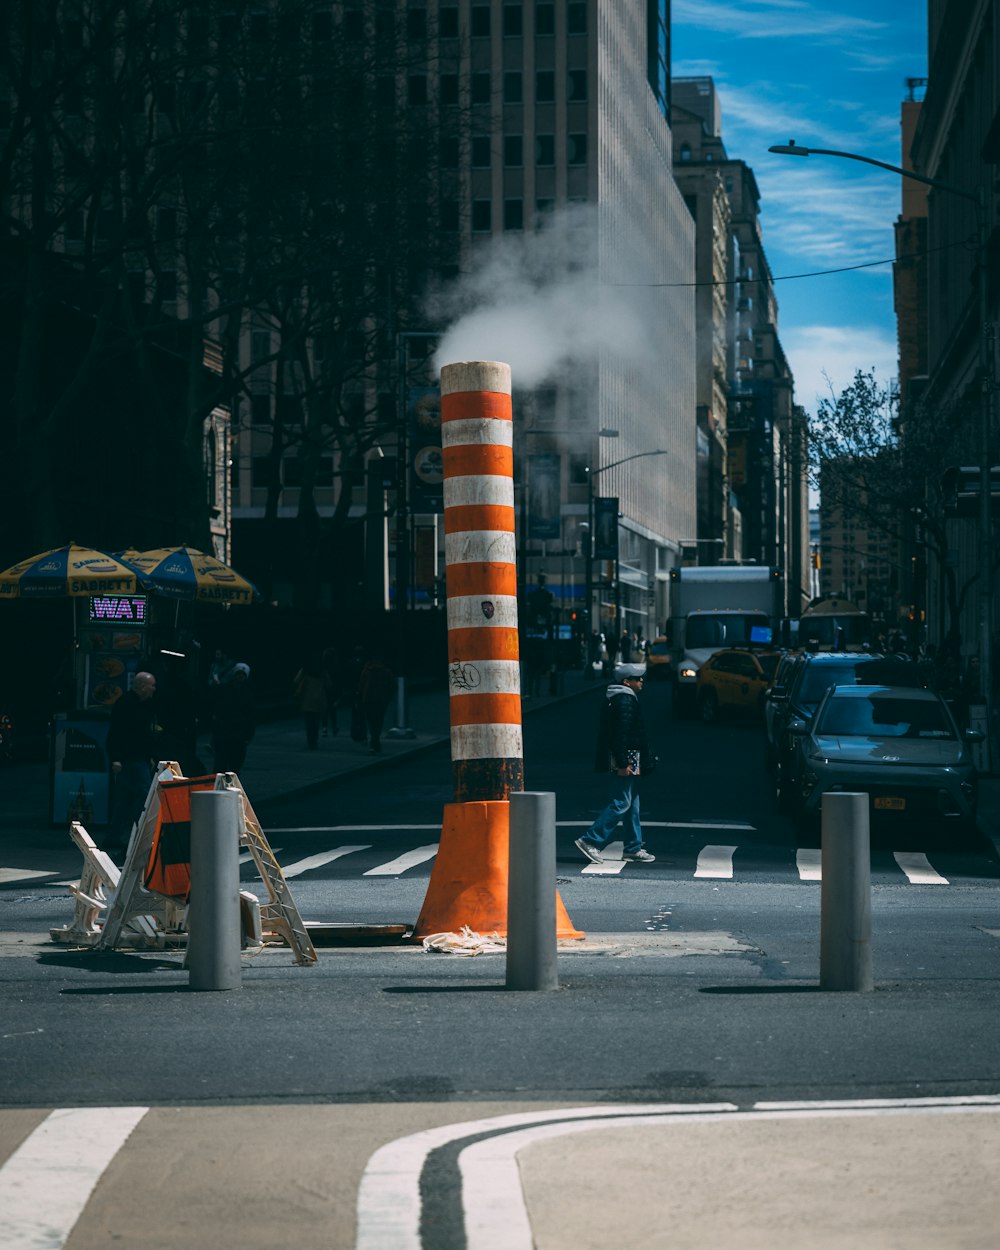 a city street with traffic cones and cars